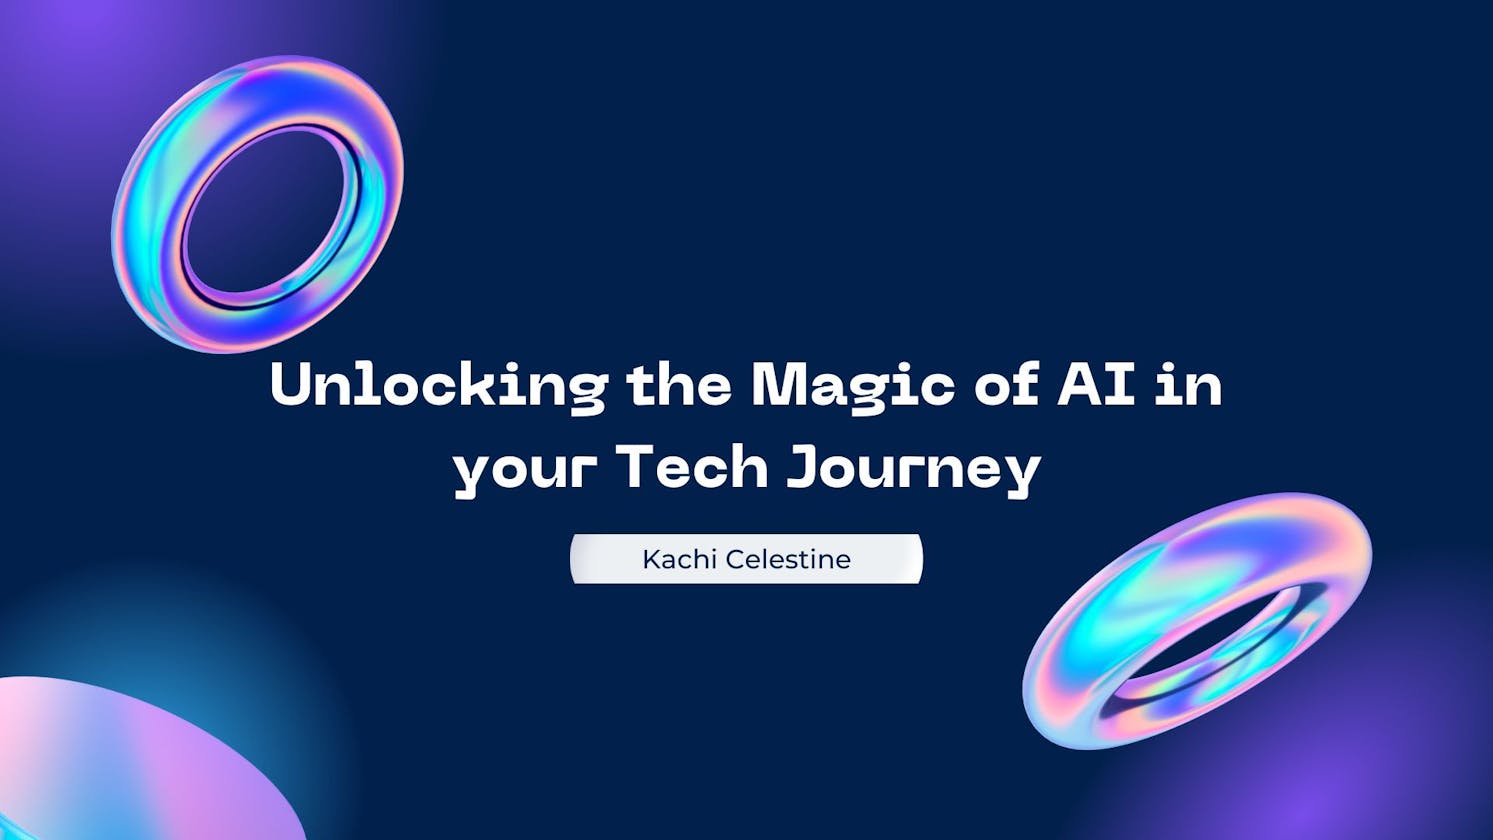 Unlocking the Magic of AI in your Tech Journey